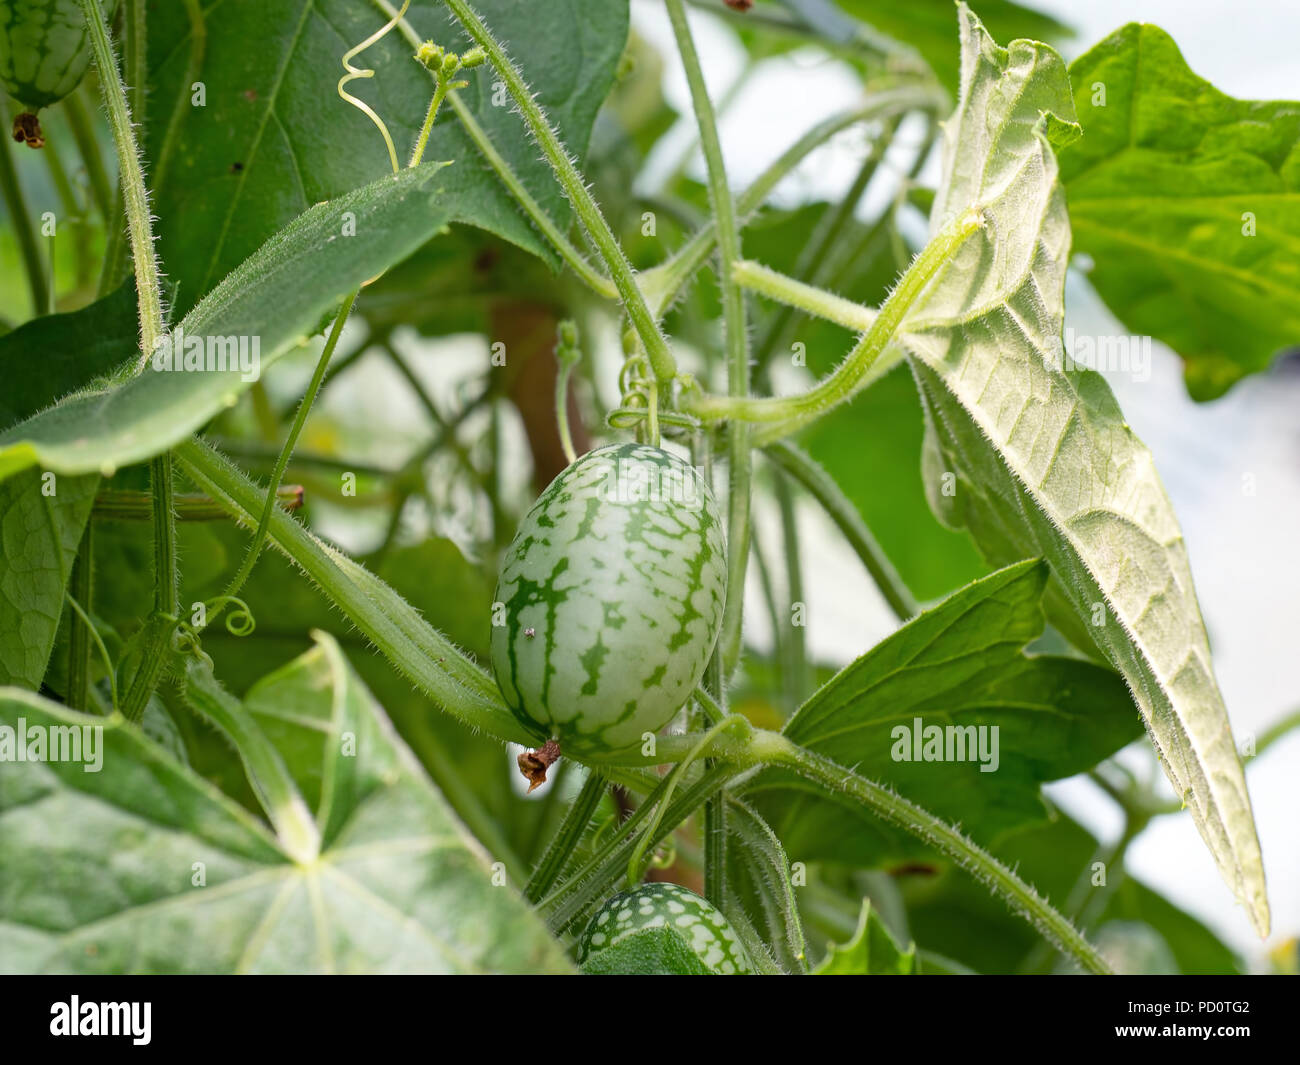 Melothria scabra aka mouse melon, cucamelon plant with fruit of tiny cucumbers that look like melons. Stock Photo